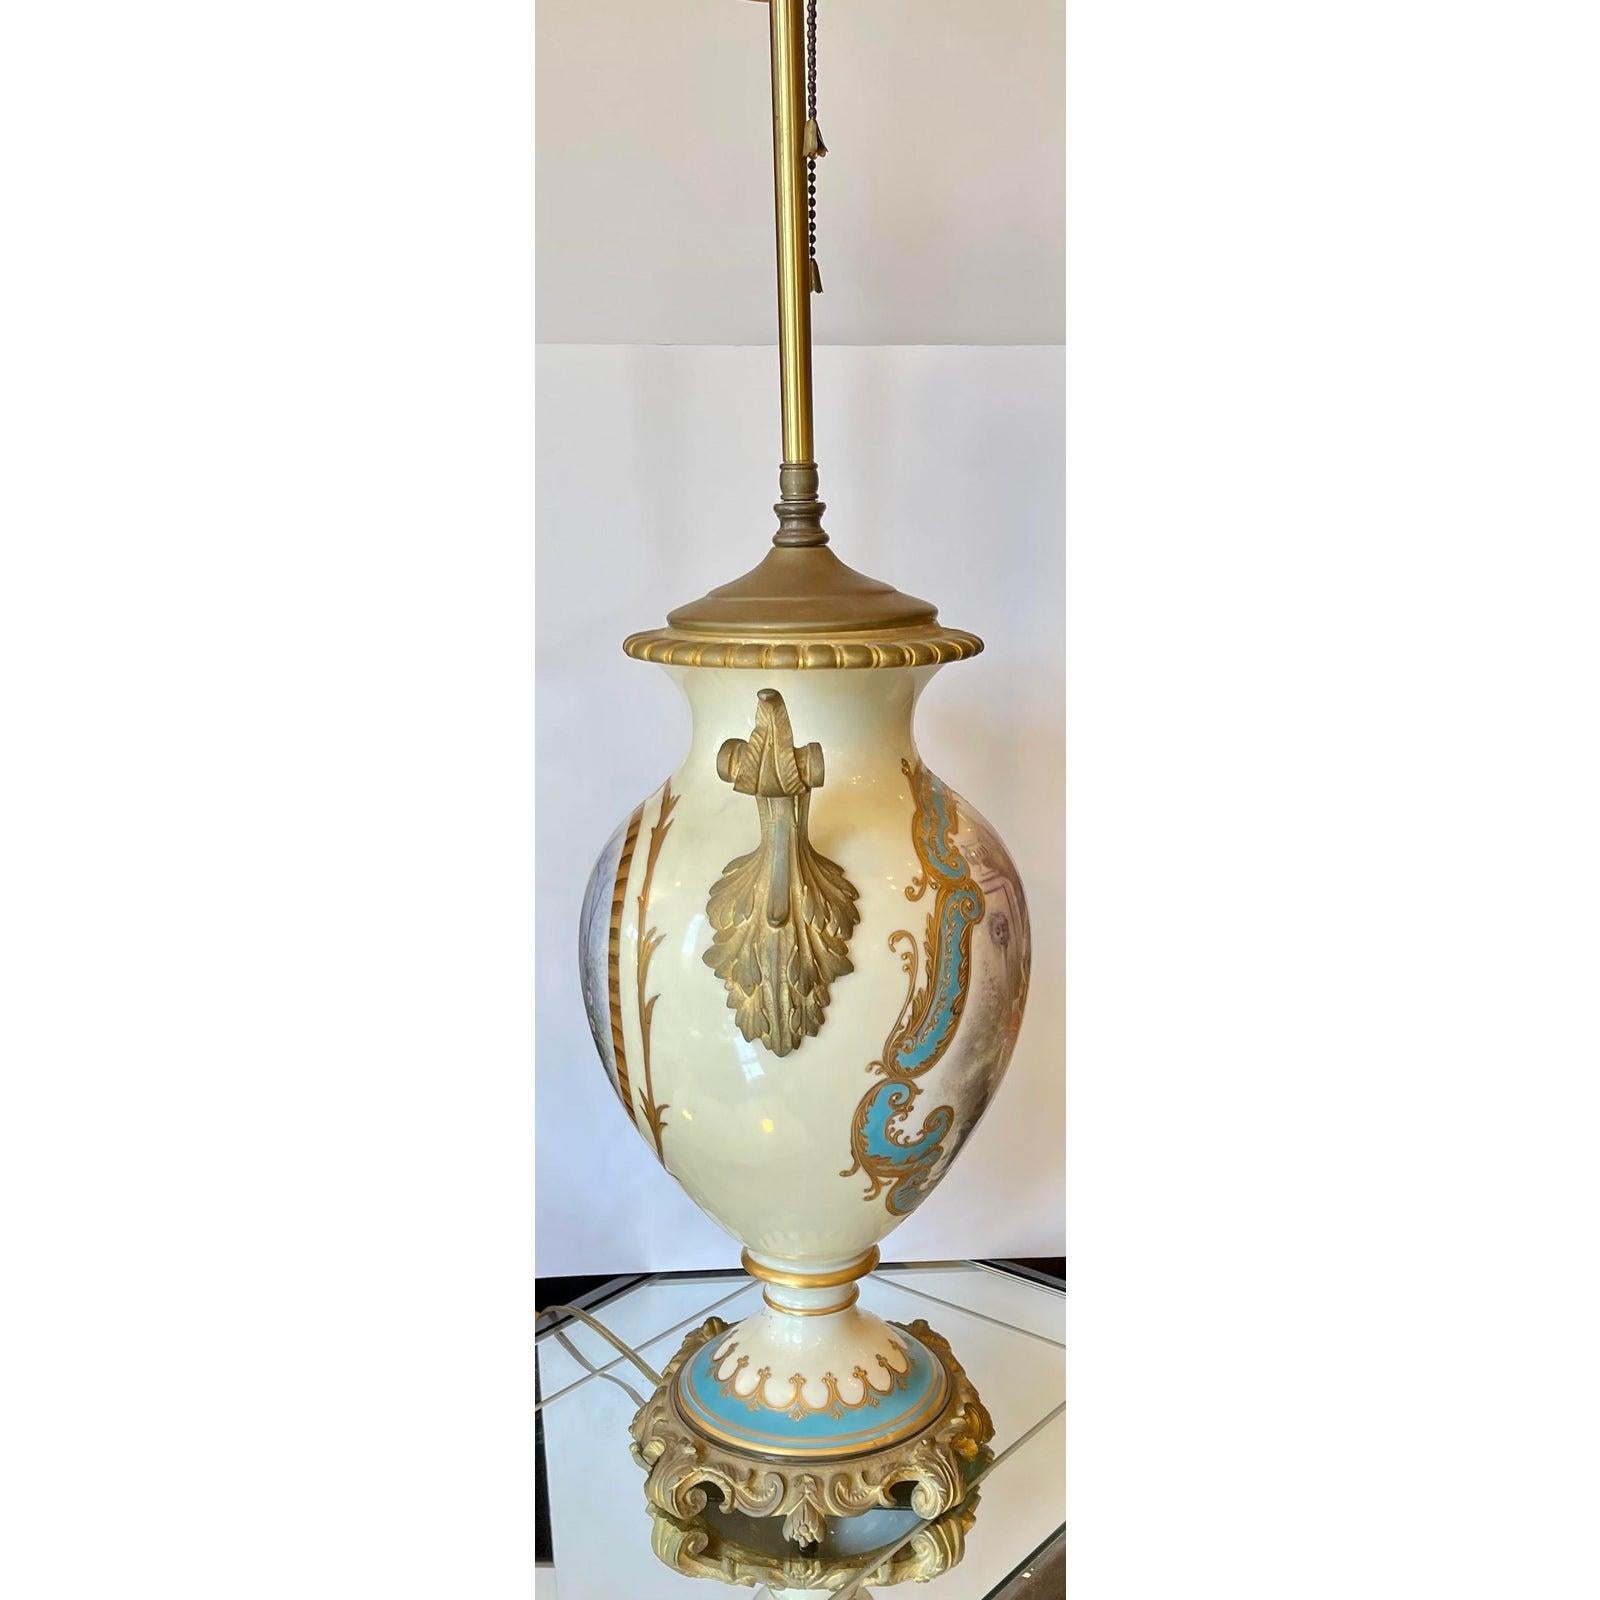 Antique French Porcelain & Gilt Bronze Serves Style Scenic Vase Table Lamp

Additional information:
Materials: bronze, porcelain
Color: bronze
Styled After: Manufacture de Sevres
Period: 19th Century
Styles: French
Lamp Shade: Not